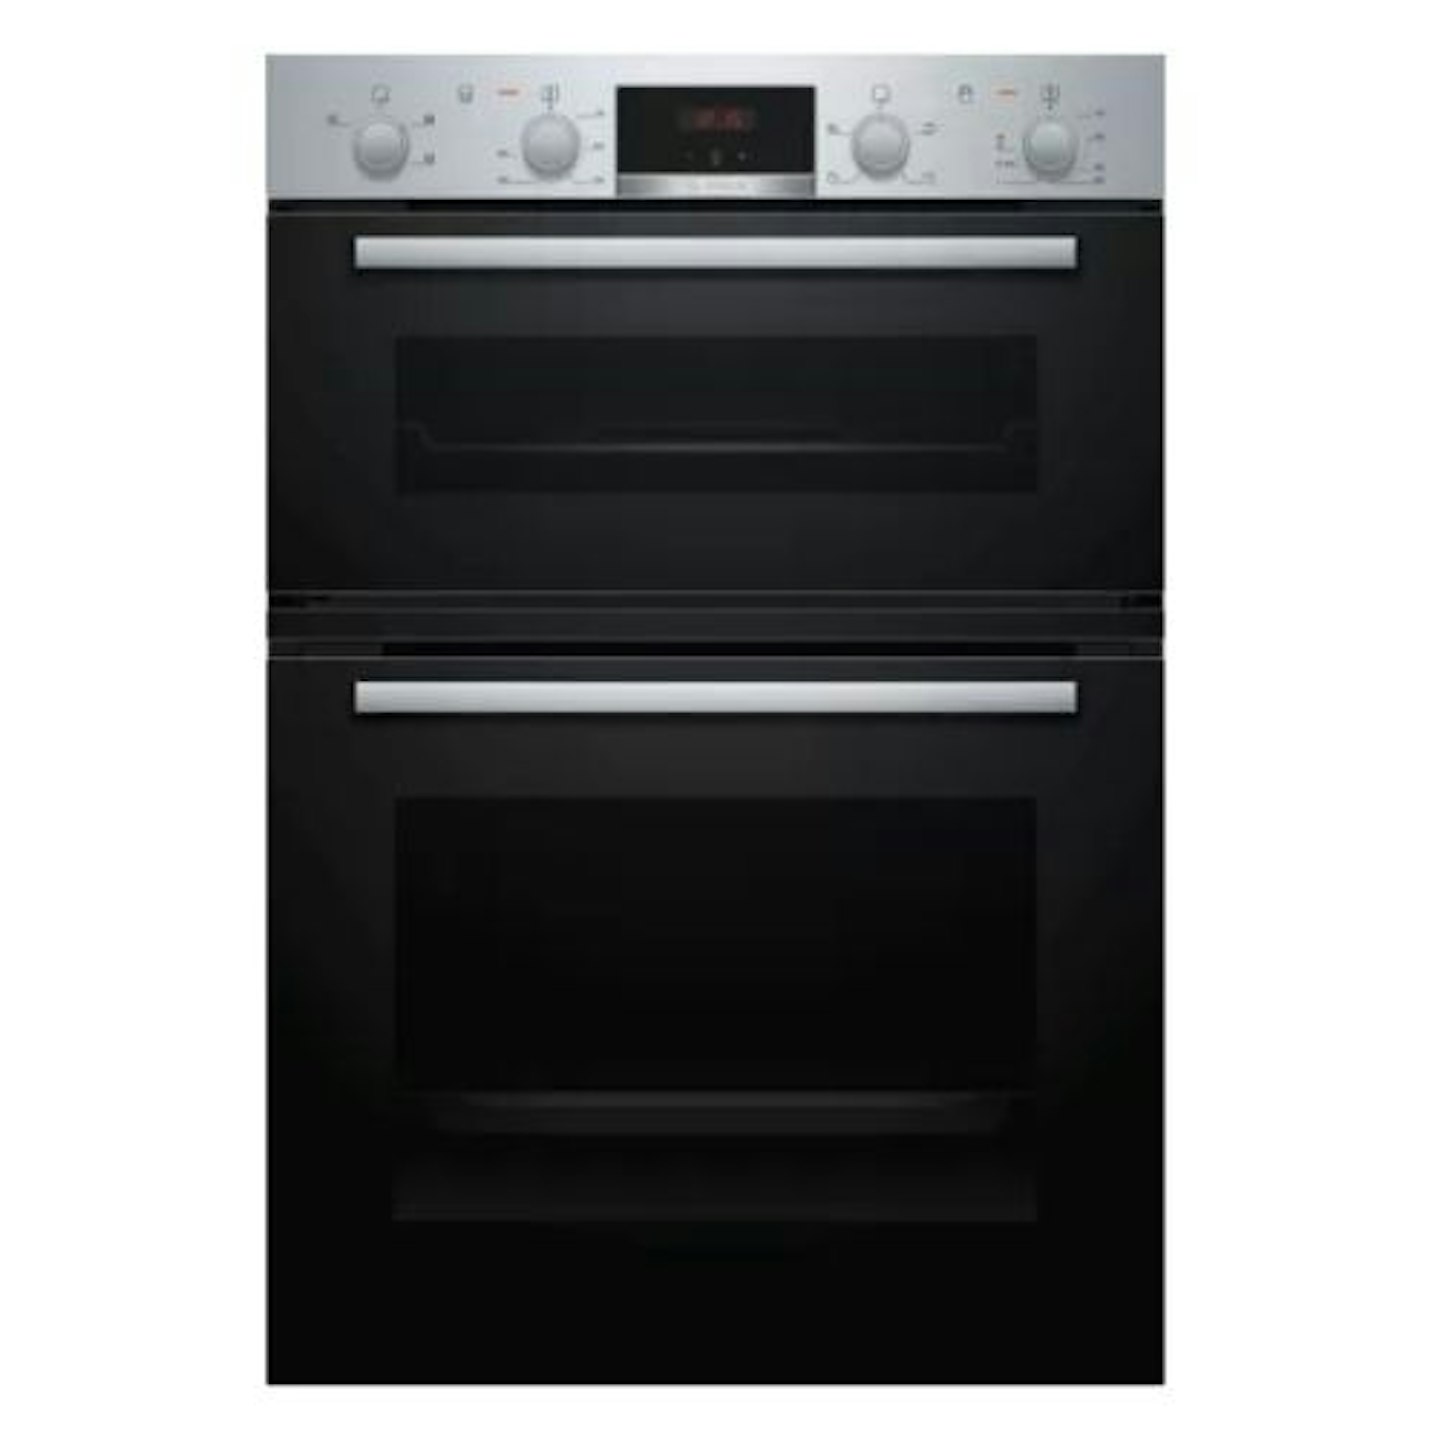 BOSCH MHA133BR0B Electric Built-in Double Oven